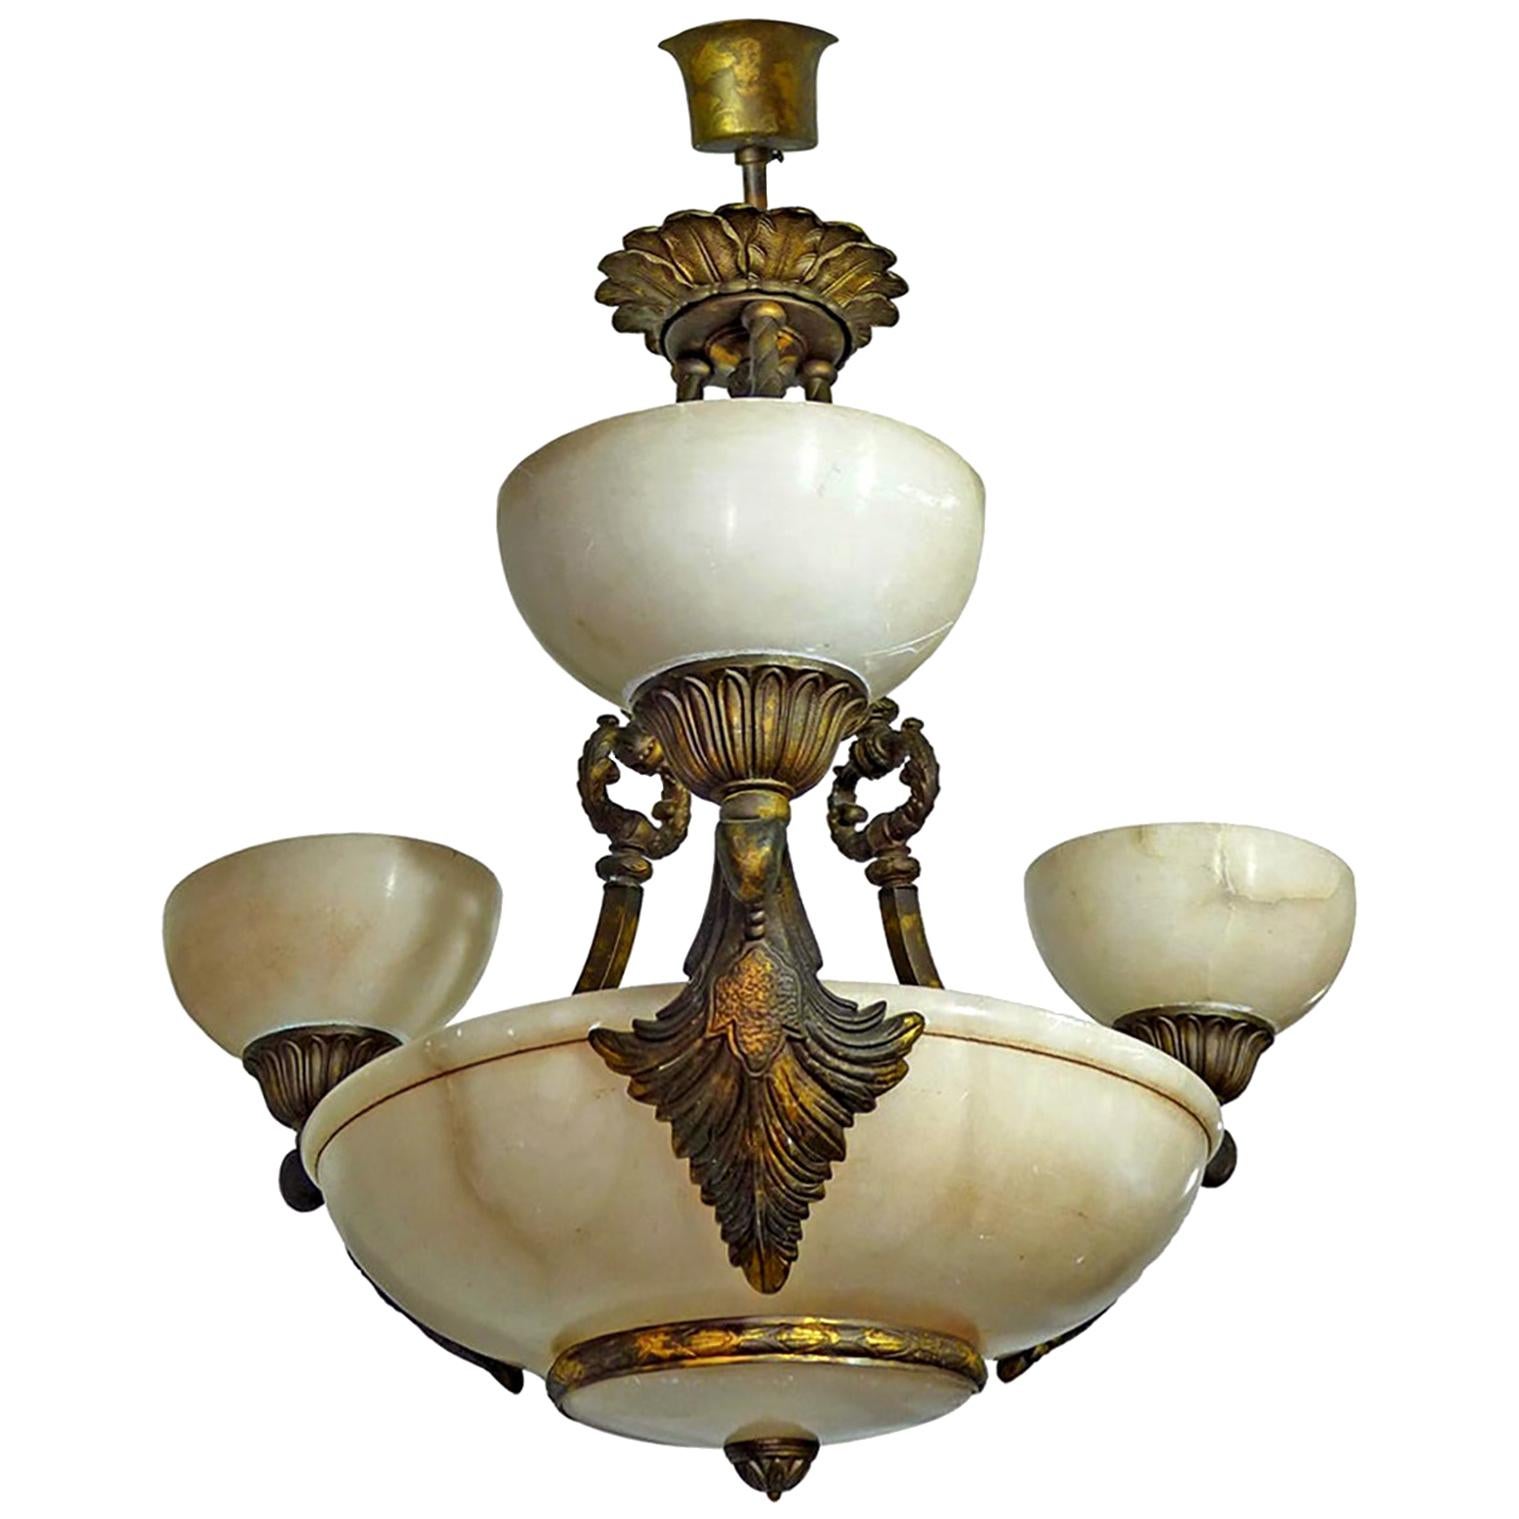 Midcentury French Art Deco and Neoclassical White Marble, Gilt Chandelier For Sale